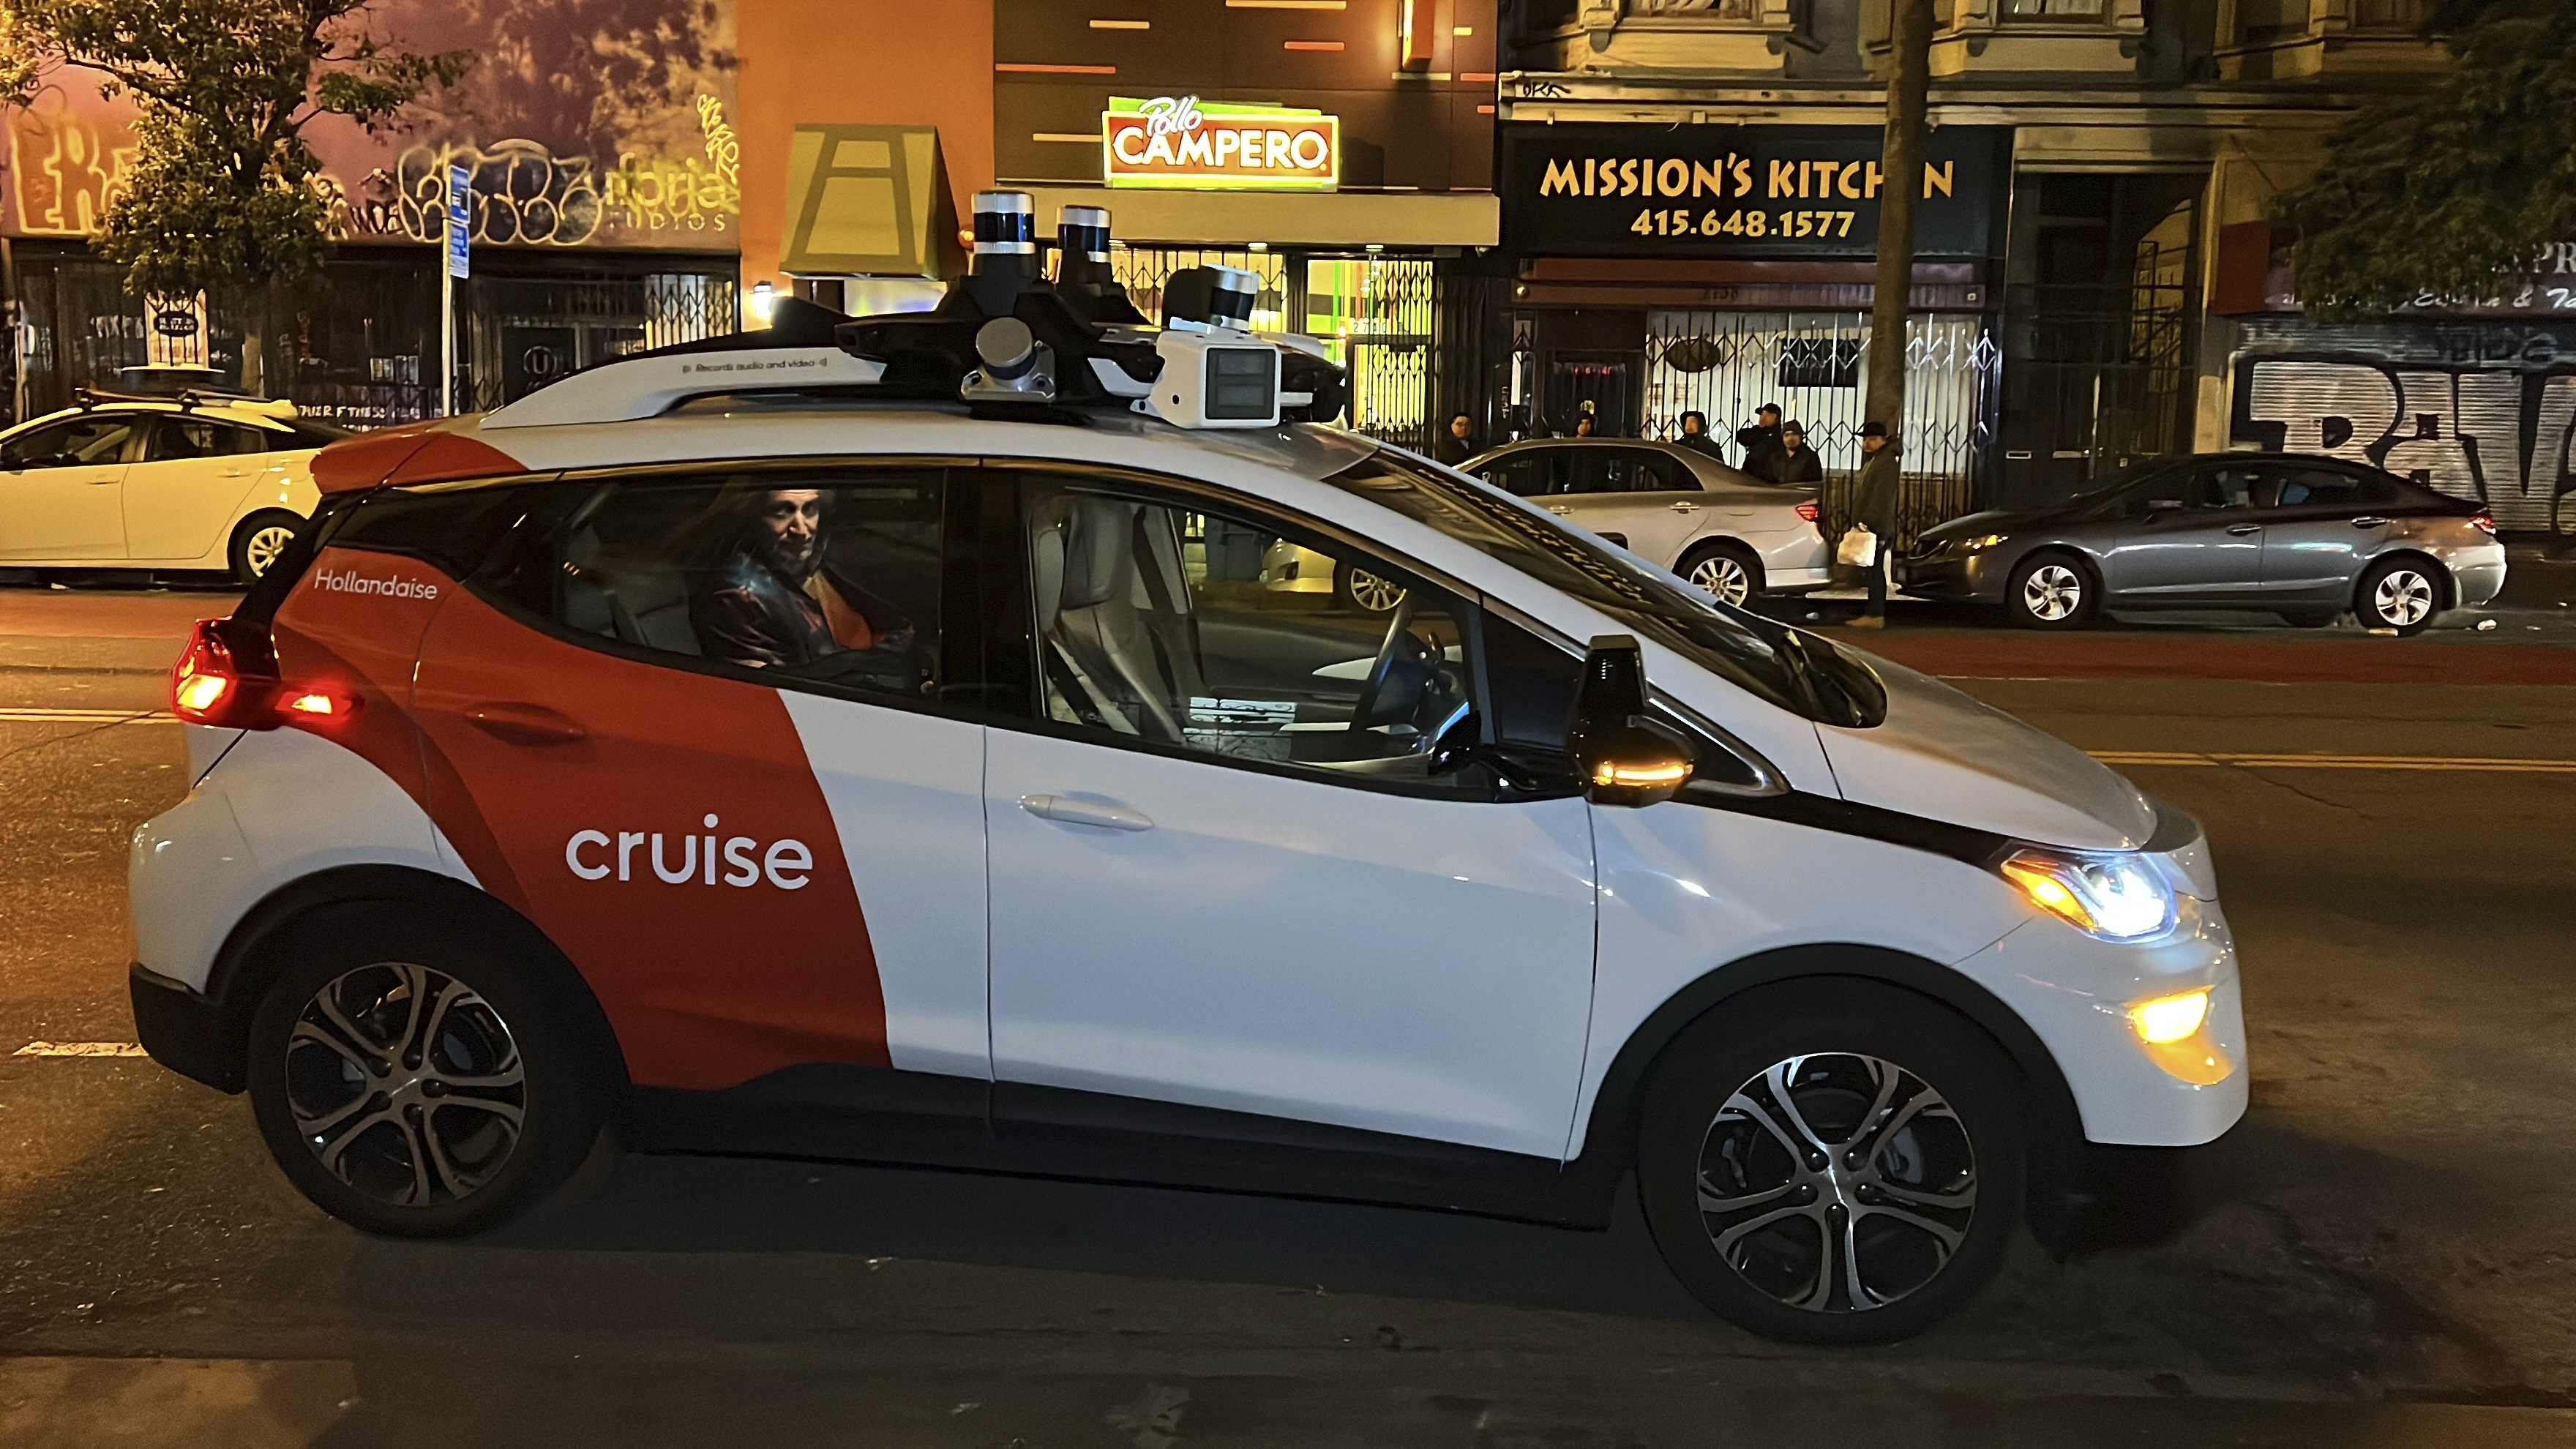 Cruise puts robotaxi operations on pause following California license suspension